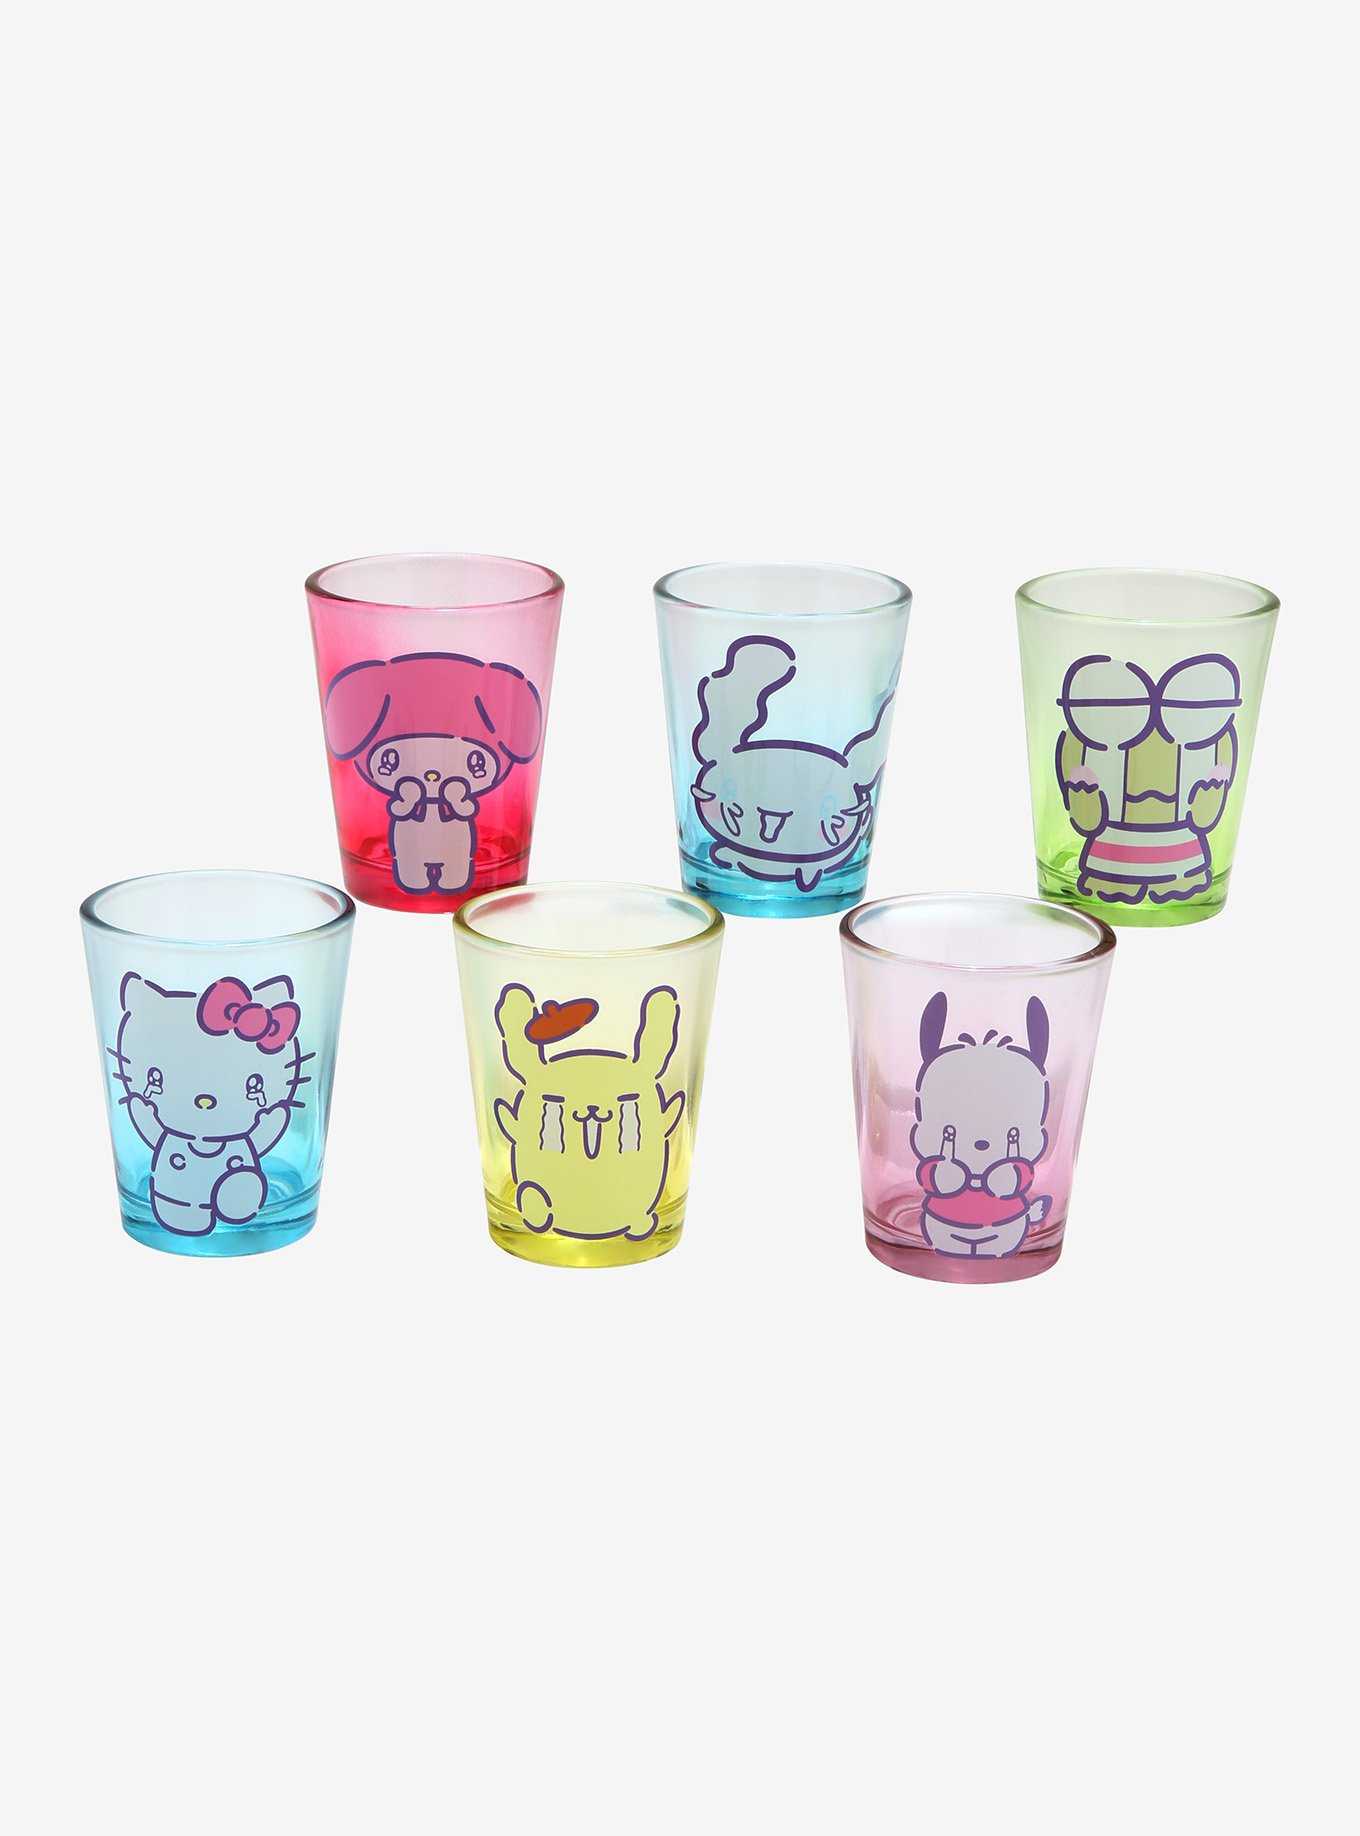 Water Drinking Glass Set of 2, Bambi and Rabbit Water Drinking